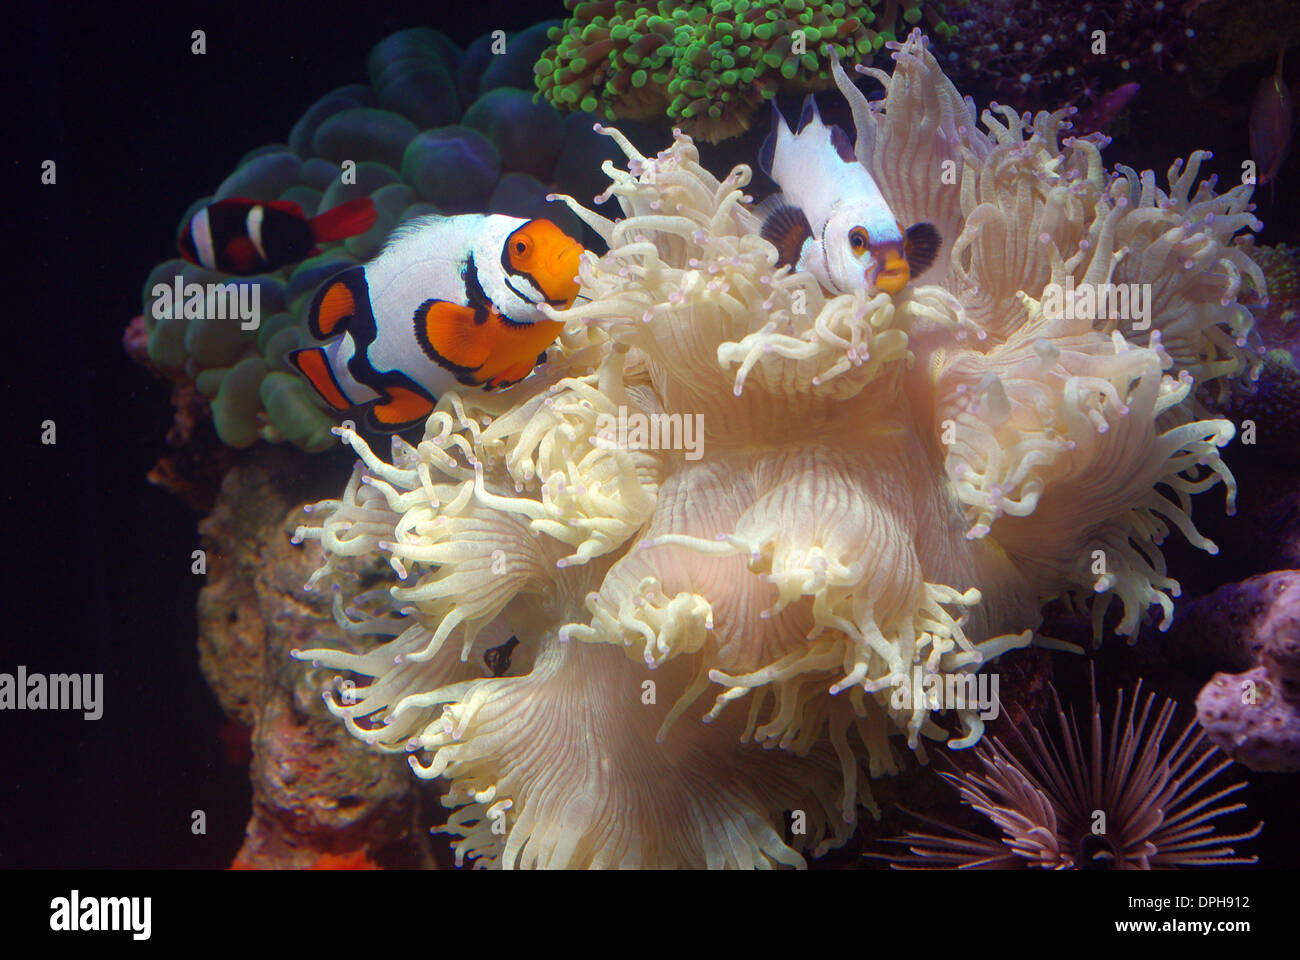 Pair of Picasso clownfish (Amphiprion ocellaris var.) symbiotic with Elegance coral (Catalaphyllia jardinei) Stock Photo